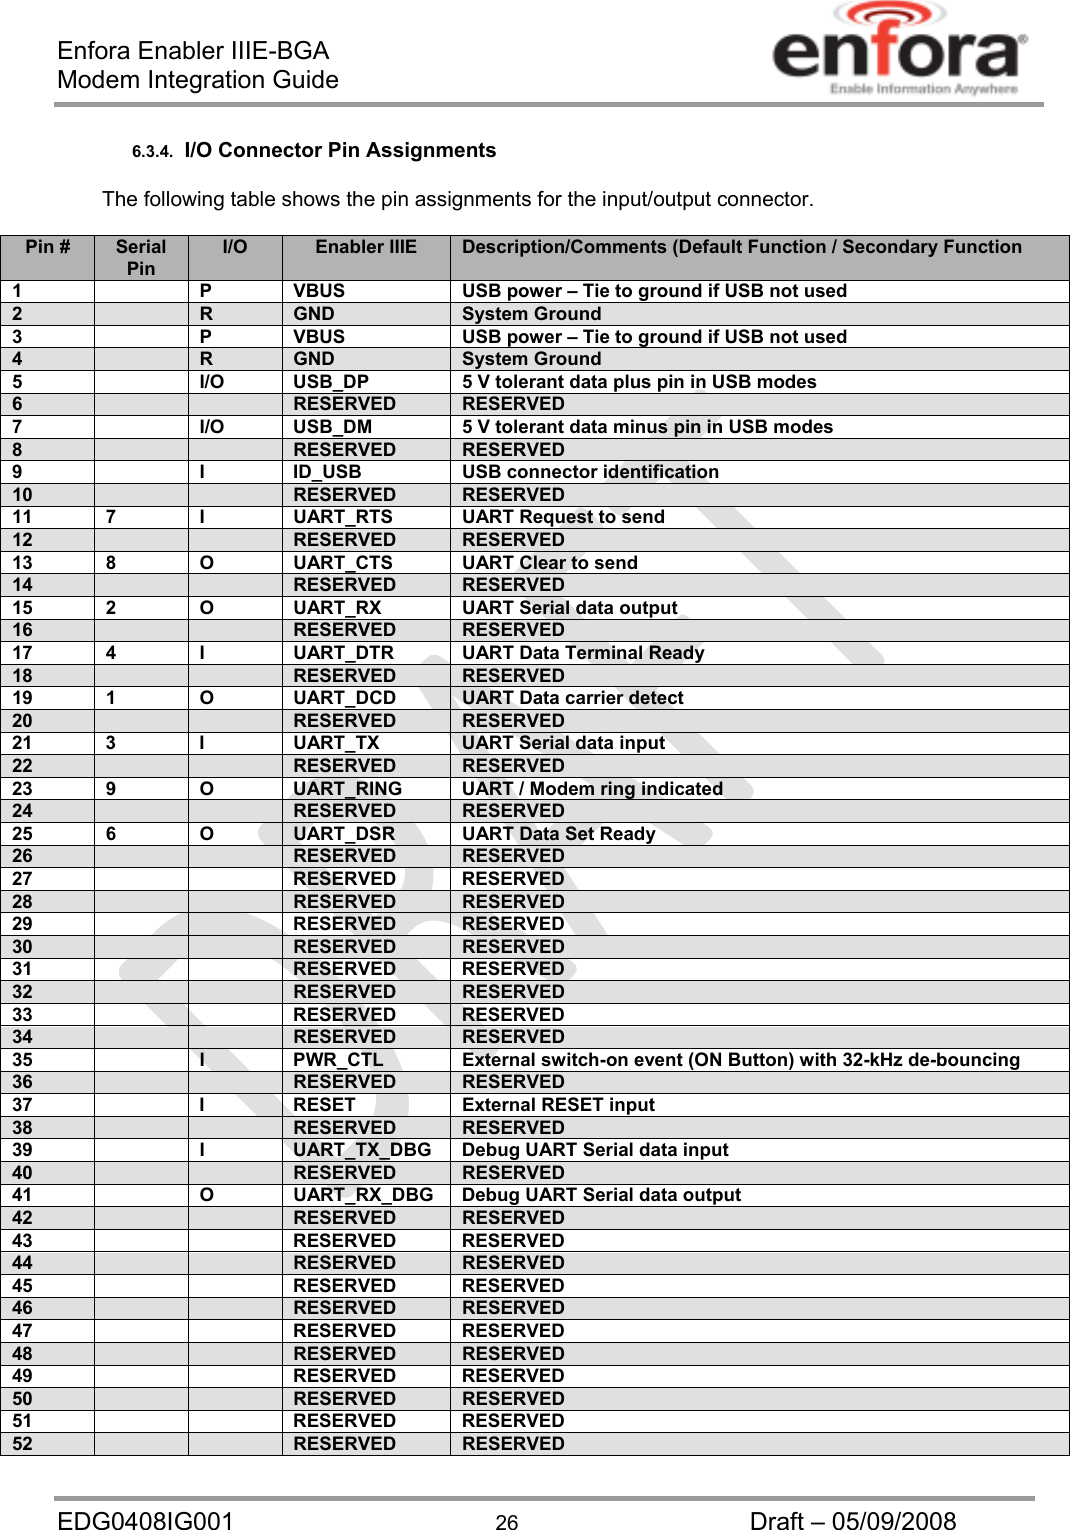 Enfora Enabler IIIE-BGA Modem Integration Guide EDG0408IG001  26  Draft – 05/09/2008 6.3.4.  I/O Connector Pin Assignments The following table shows the pin assignments for the input/output connector.    Pin #  Serial Pin I/O  Enabler IIIE  Description/Comments (Default Function / Secondary Function1   P VBUS USB power –Tie to ground if USB not used 2   R  GND  System Ground3   P VBUS USB power –Tie to ground if USB not used 4   R  GND  System Ground5    I/O  USB_DP  5 V tolerant data plus pin in USB modes  6    RESERVED  RESERVED7    I/O  USB_DM  5 V tolerant data minus pin in USB modes 8    RESERVED  RESERVED9    I  ID_USB  USB connector identification10    RESERVED  RESERVED11  7  I  UART_RTS  UART Request to send12    RESERVED  RESERVED13  8  O  UART_CTS  UART Clear to send14    RESERVED  RESERVED15  2  O  UART_RX  UART Serial data output16    RESERVED  RESERVED17  4  I  UART_DTR  UART Data Terminal Ready18    RESERVED  RESERVED19  1  O  UART_DCD  UART Data carrier detect20    RESERVED  RESERVED21  3  I  UART_TX  UART Serial data input22    RESERVED  RESERVED23  9  O  UART_RING  UART / Modem ring indicated24    RESERVED  RESERVED25  6  O  UART_DSR  UART Data Set Ready26    RESERVED  RESERVED27   RESERVED RESERVED28    RESERVED  RESERVED29   RESERVED RESERVED30    RESERVED  RESERVED31   RESERVED RESERVED32    RESERVED  RESERVED33   RESERVED RESERVED34    RESERVED  RESERVED35    I  PWR_CTL  External switch-on event (ON Button) with 32-kHz de-bouncing36    RESERVED  RESERVED37    I  RESET  External RESET input38    RESERVED  RESERVED39    I  UART_TX_DBG Debug UART Serial data input40    RESERVED  RESERVED41    O  UART_RX_DBG Debug UART Serial data output42    RESERVED  RESERVED43   RESERVED RESERVED44    RESERVED  RESERVED45   RESERVED RESERVED46    RESERVED  RESERVED47   RESERVED RESERVED48    RESERVED  RESERVED49   RESERVED RESERVED50    RESERVED  RESERVED51   RESERVED RESERVED52    RESERVED  RESERVED